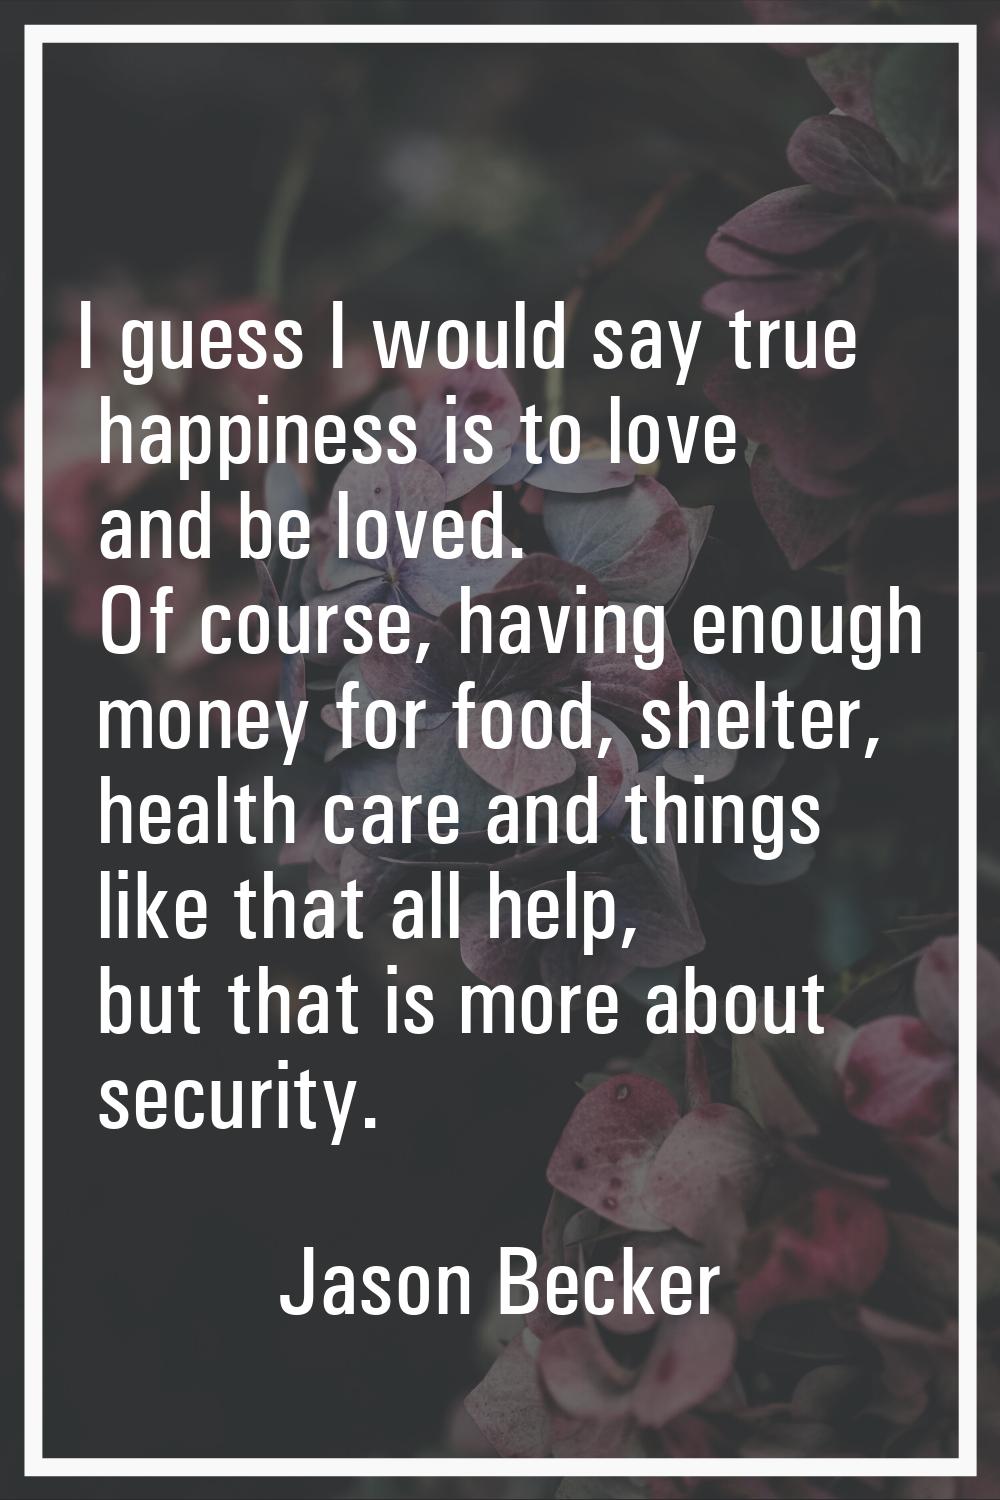 I guess I would say true happiness is to love and be loved. Of course, having enough money for food